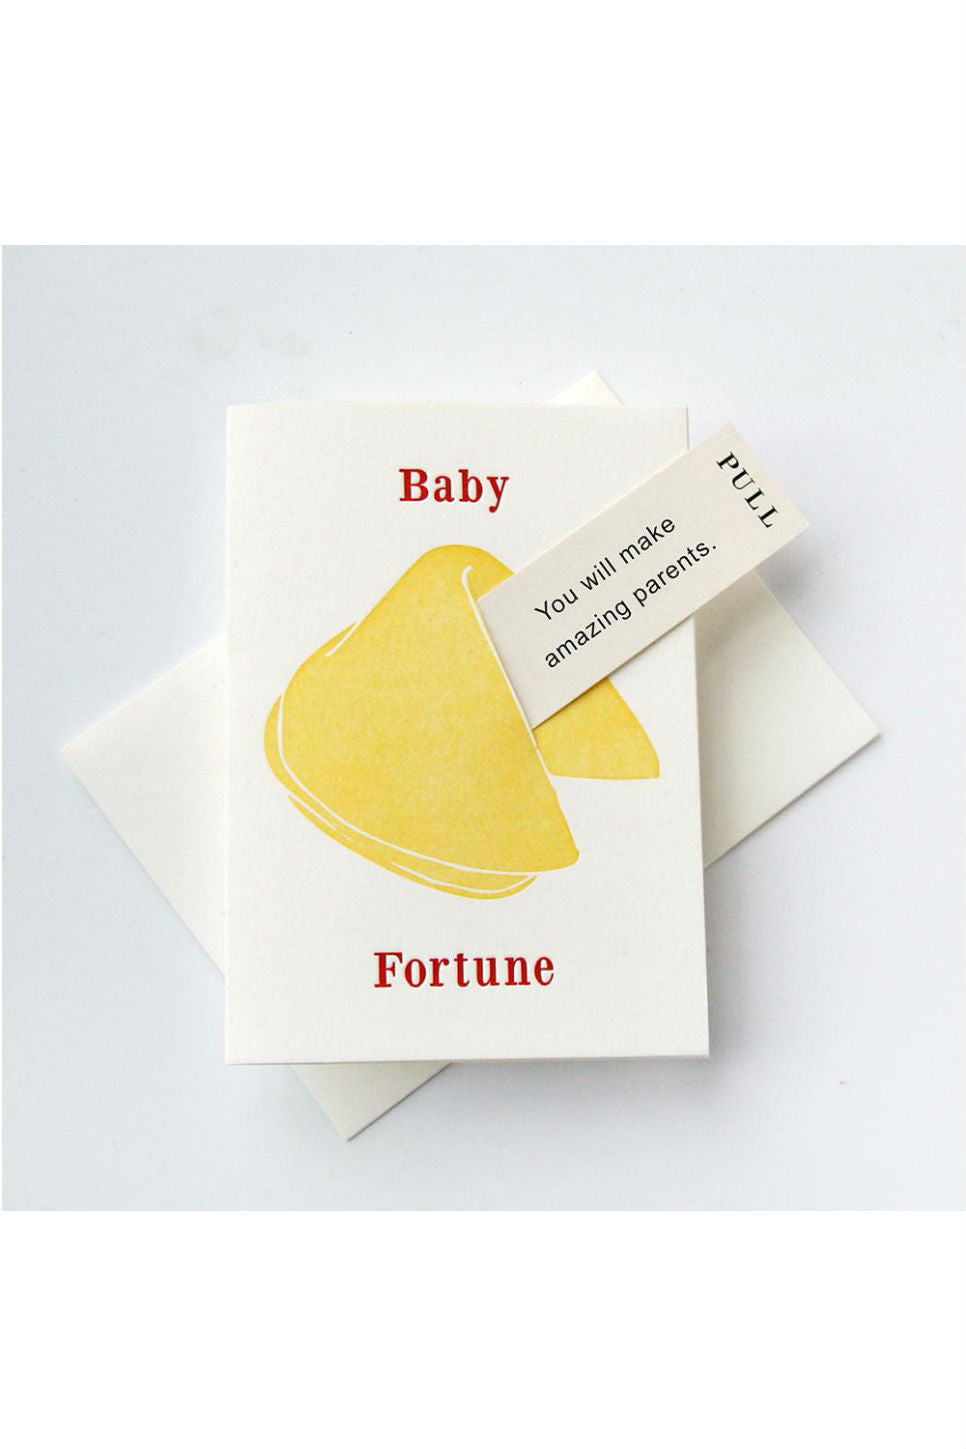 FORTUNE BABY AMAZING PARENTS CARD